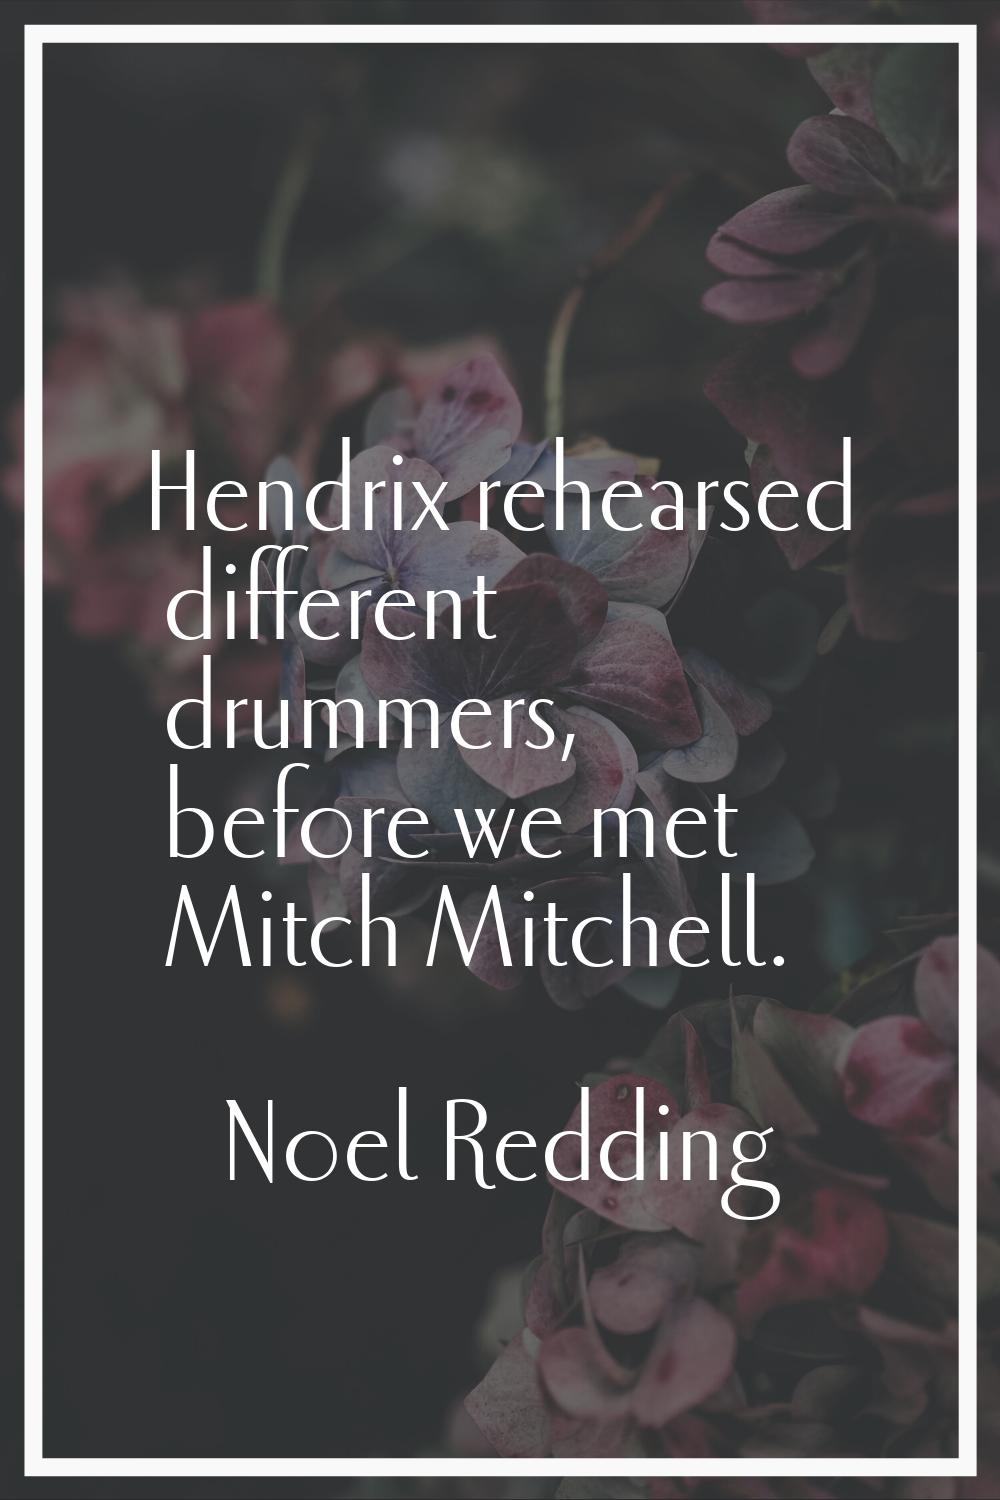 Hendrix rehearsed different drummers, before we met Mitch Mitchell.